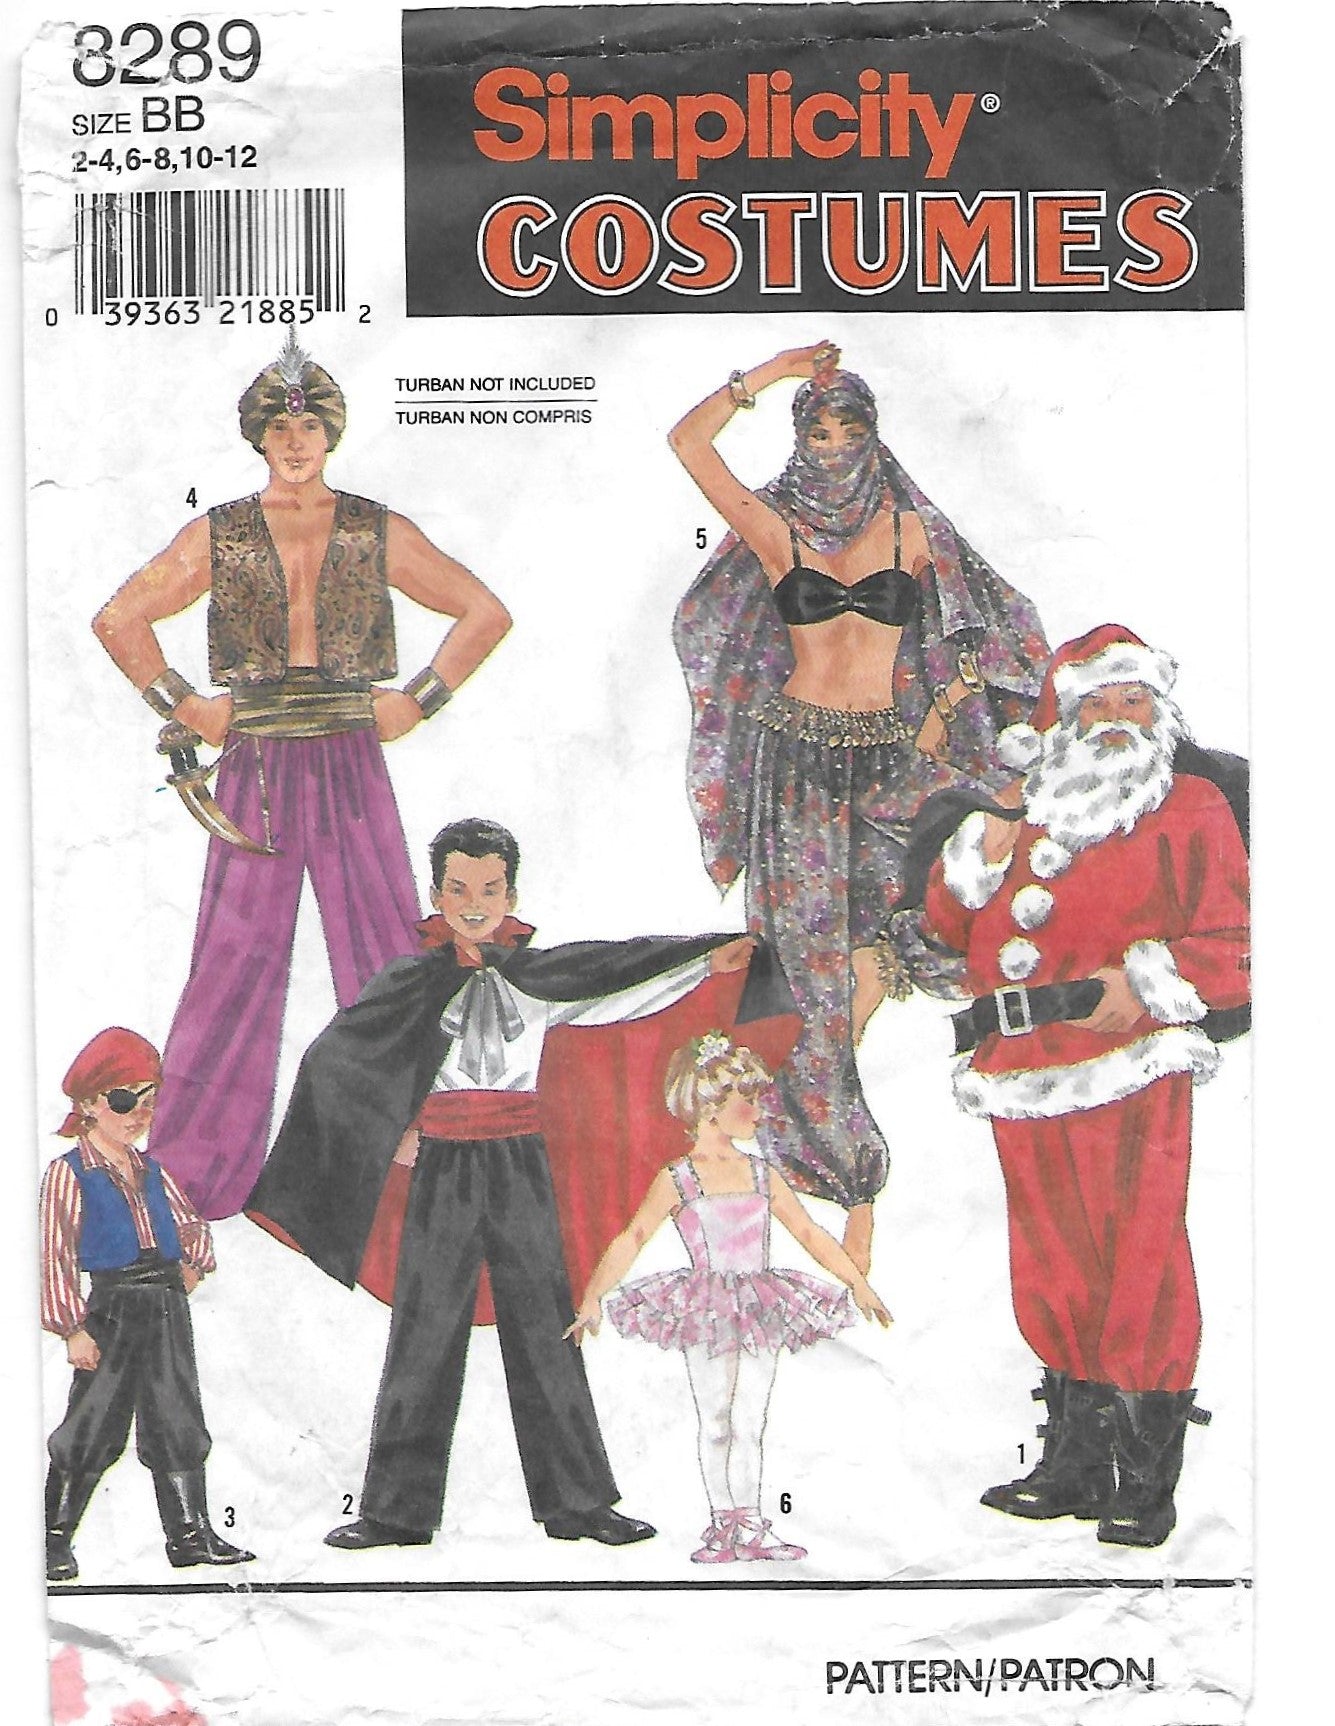 SALE 1990 Simplicity 8289 Pattern - Child's Costumes